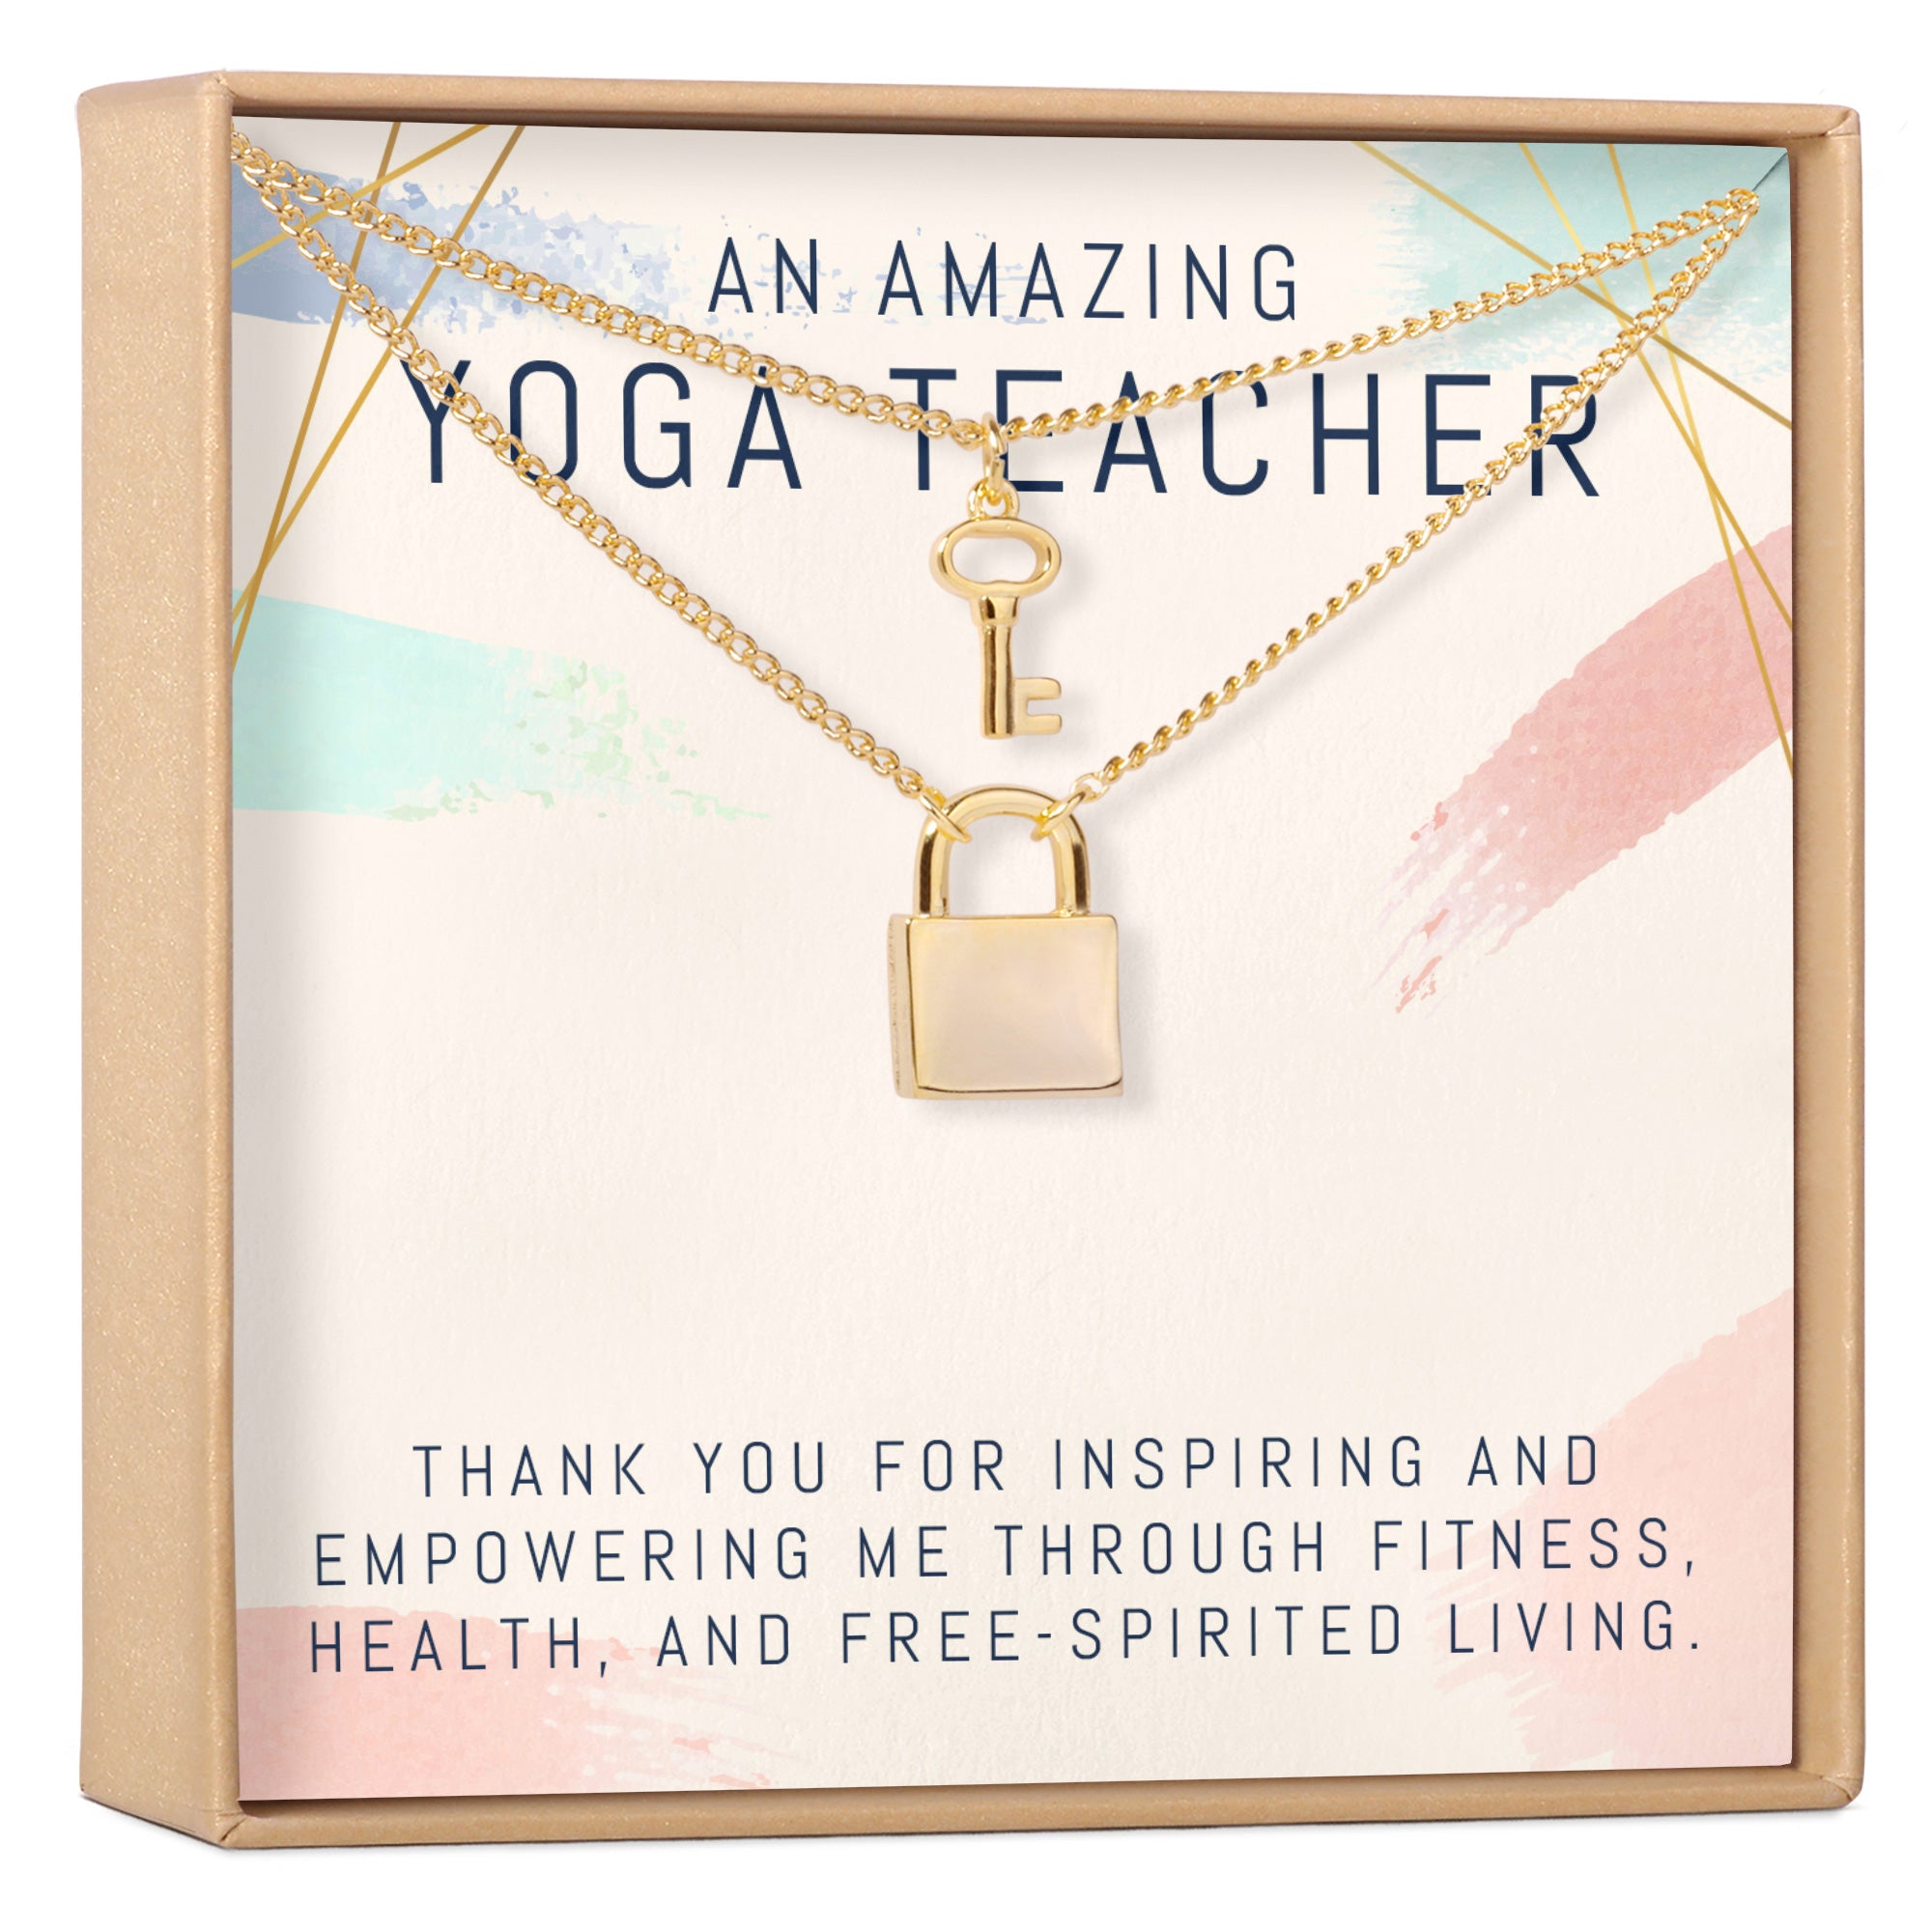 Yoga Teacher Gift Guide - Get Something They Will Really Use